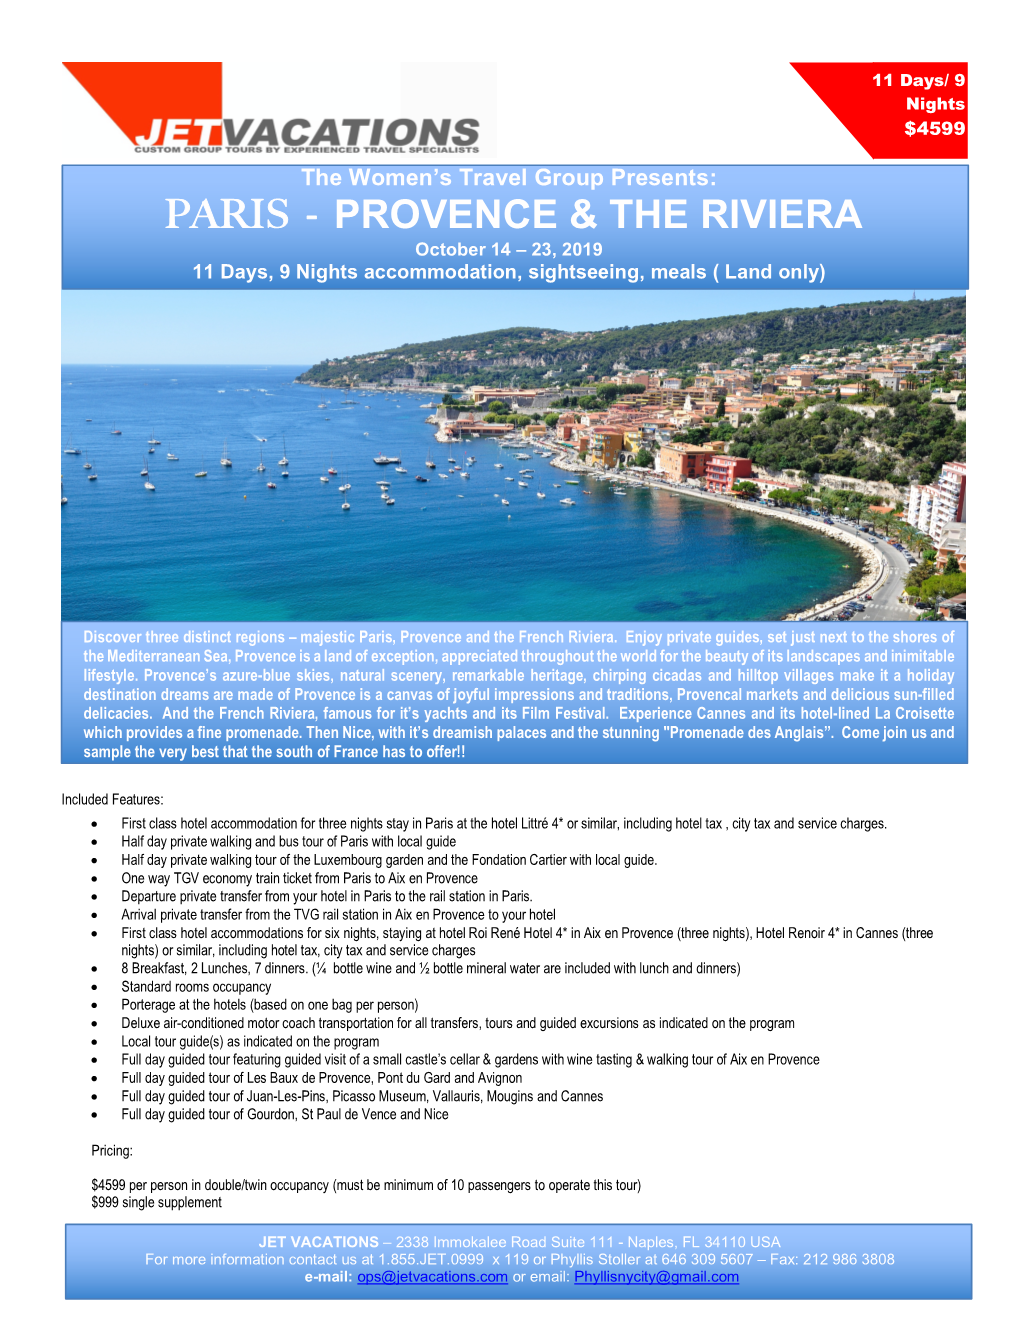 PARIS - PROVENCE & the RIVIERA October 14 – 23, 2019 11 Days, 9 Nights Accommodation, Sightseeing, Meals ( Land Only)